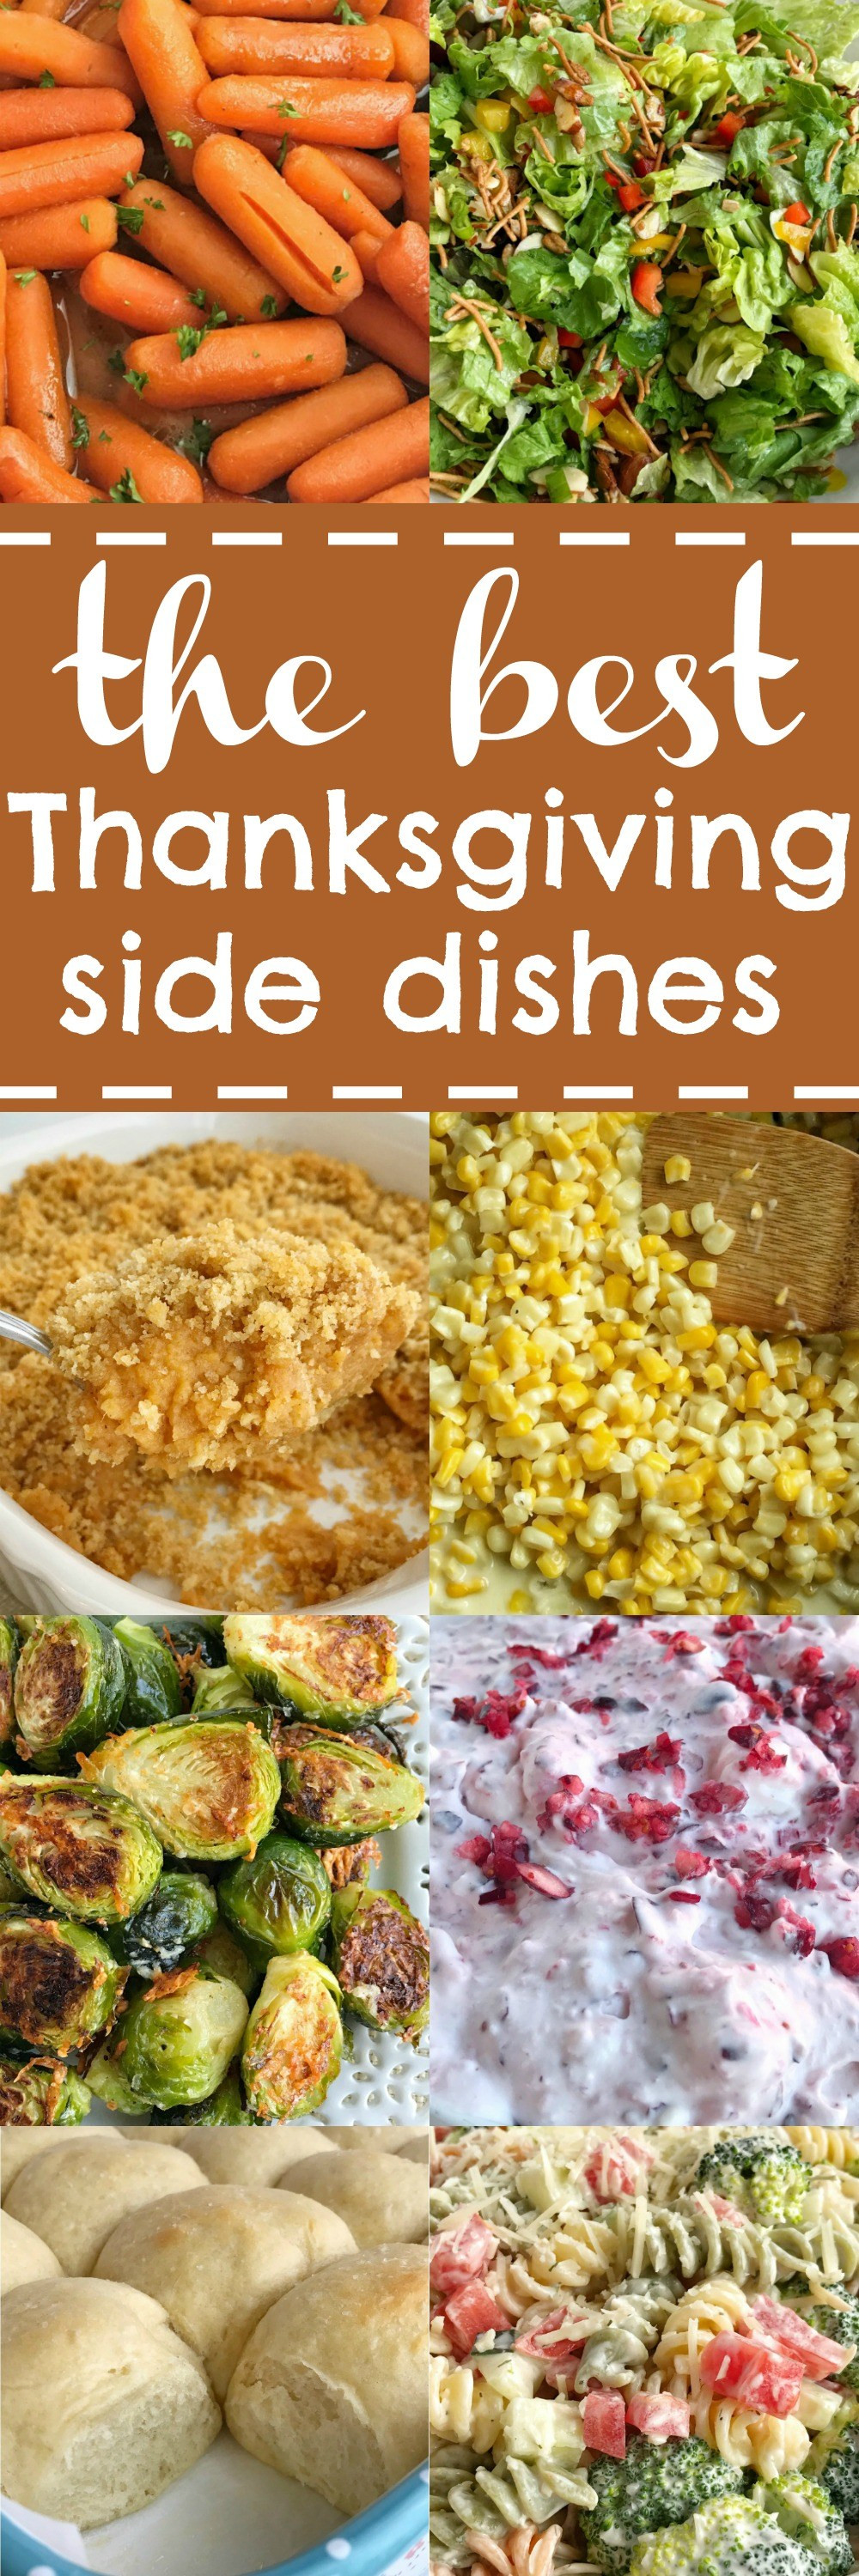 The Best Thanksgiving Side Dishes
 The Best Thanksgiving Side Dish Recipes To her as Family